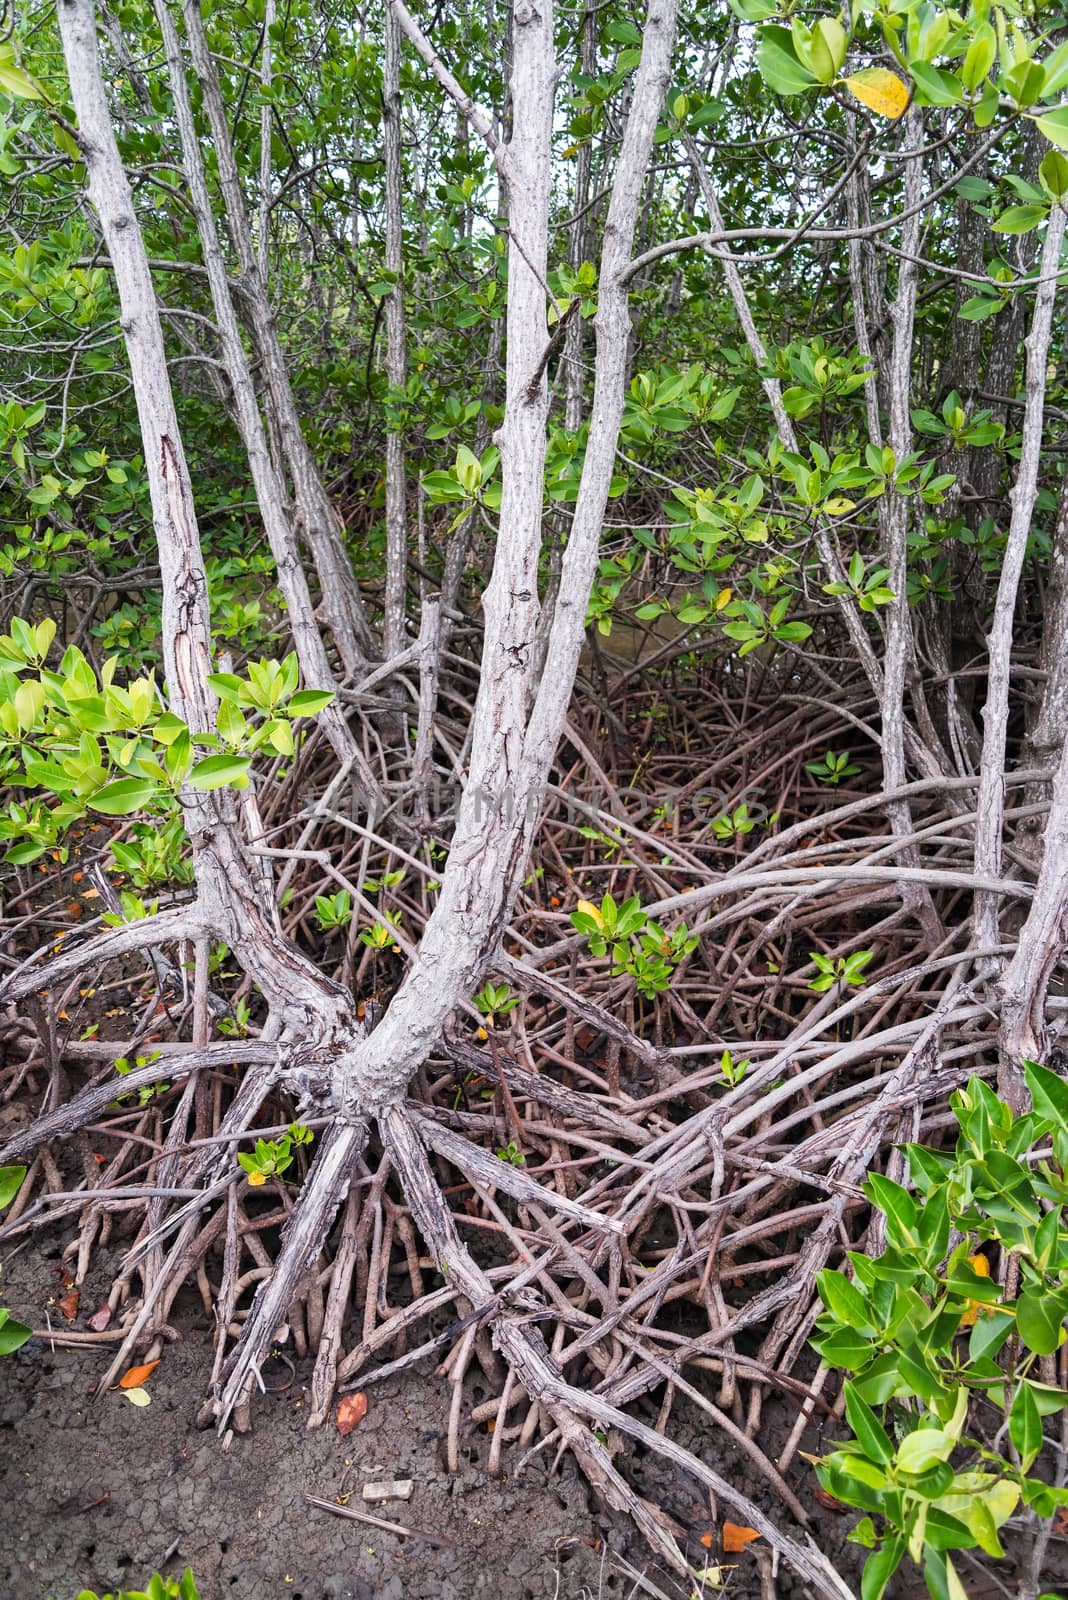 Mangrove forest on the coast of Thailand by jakgree